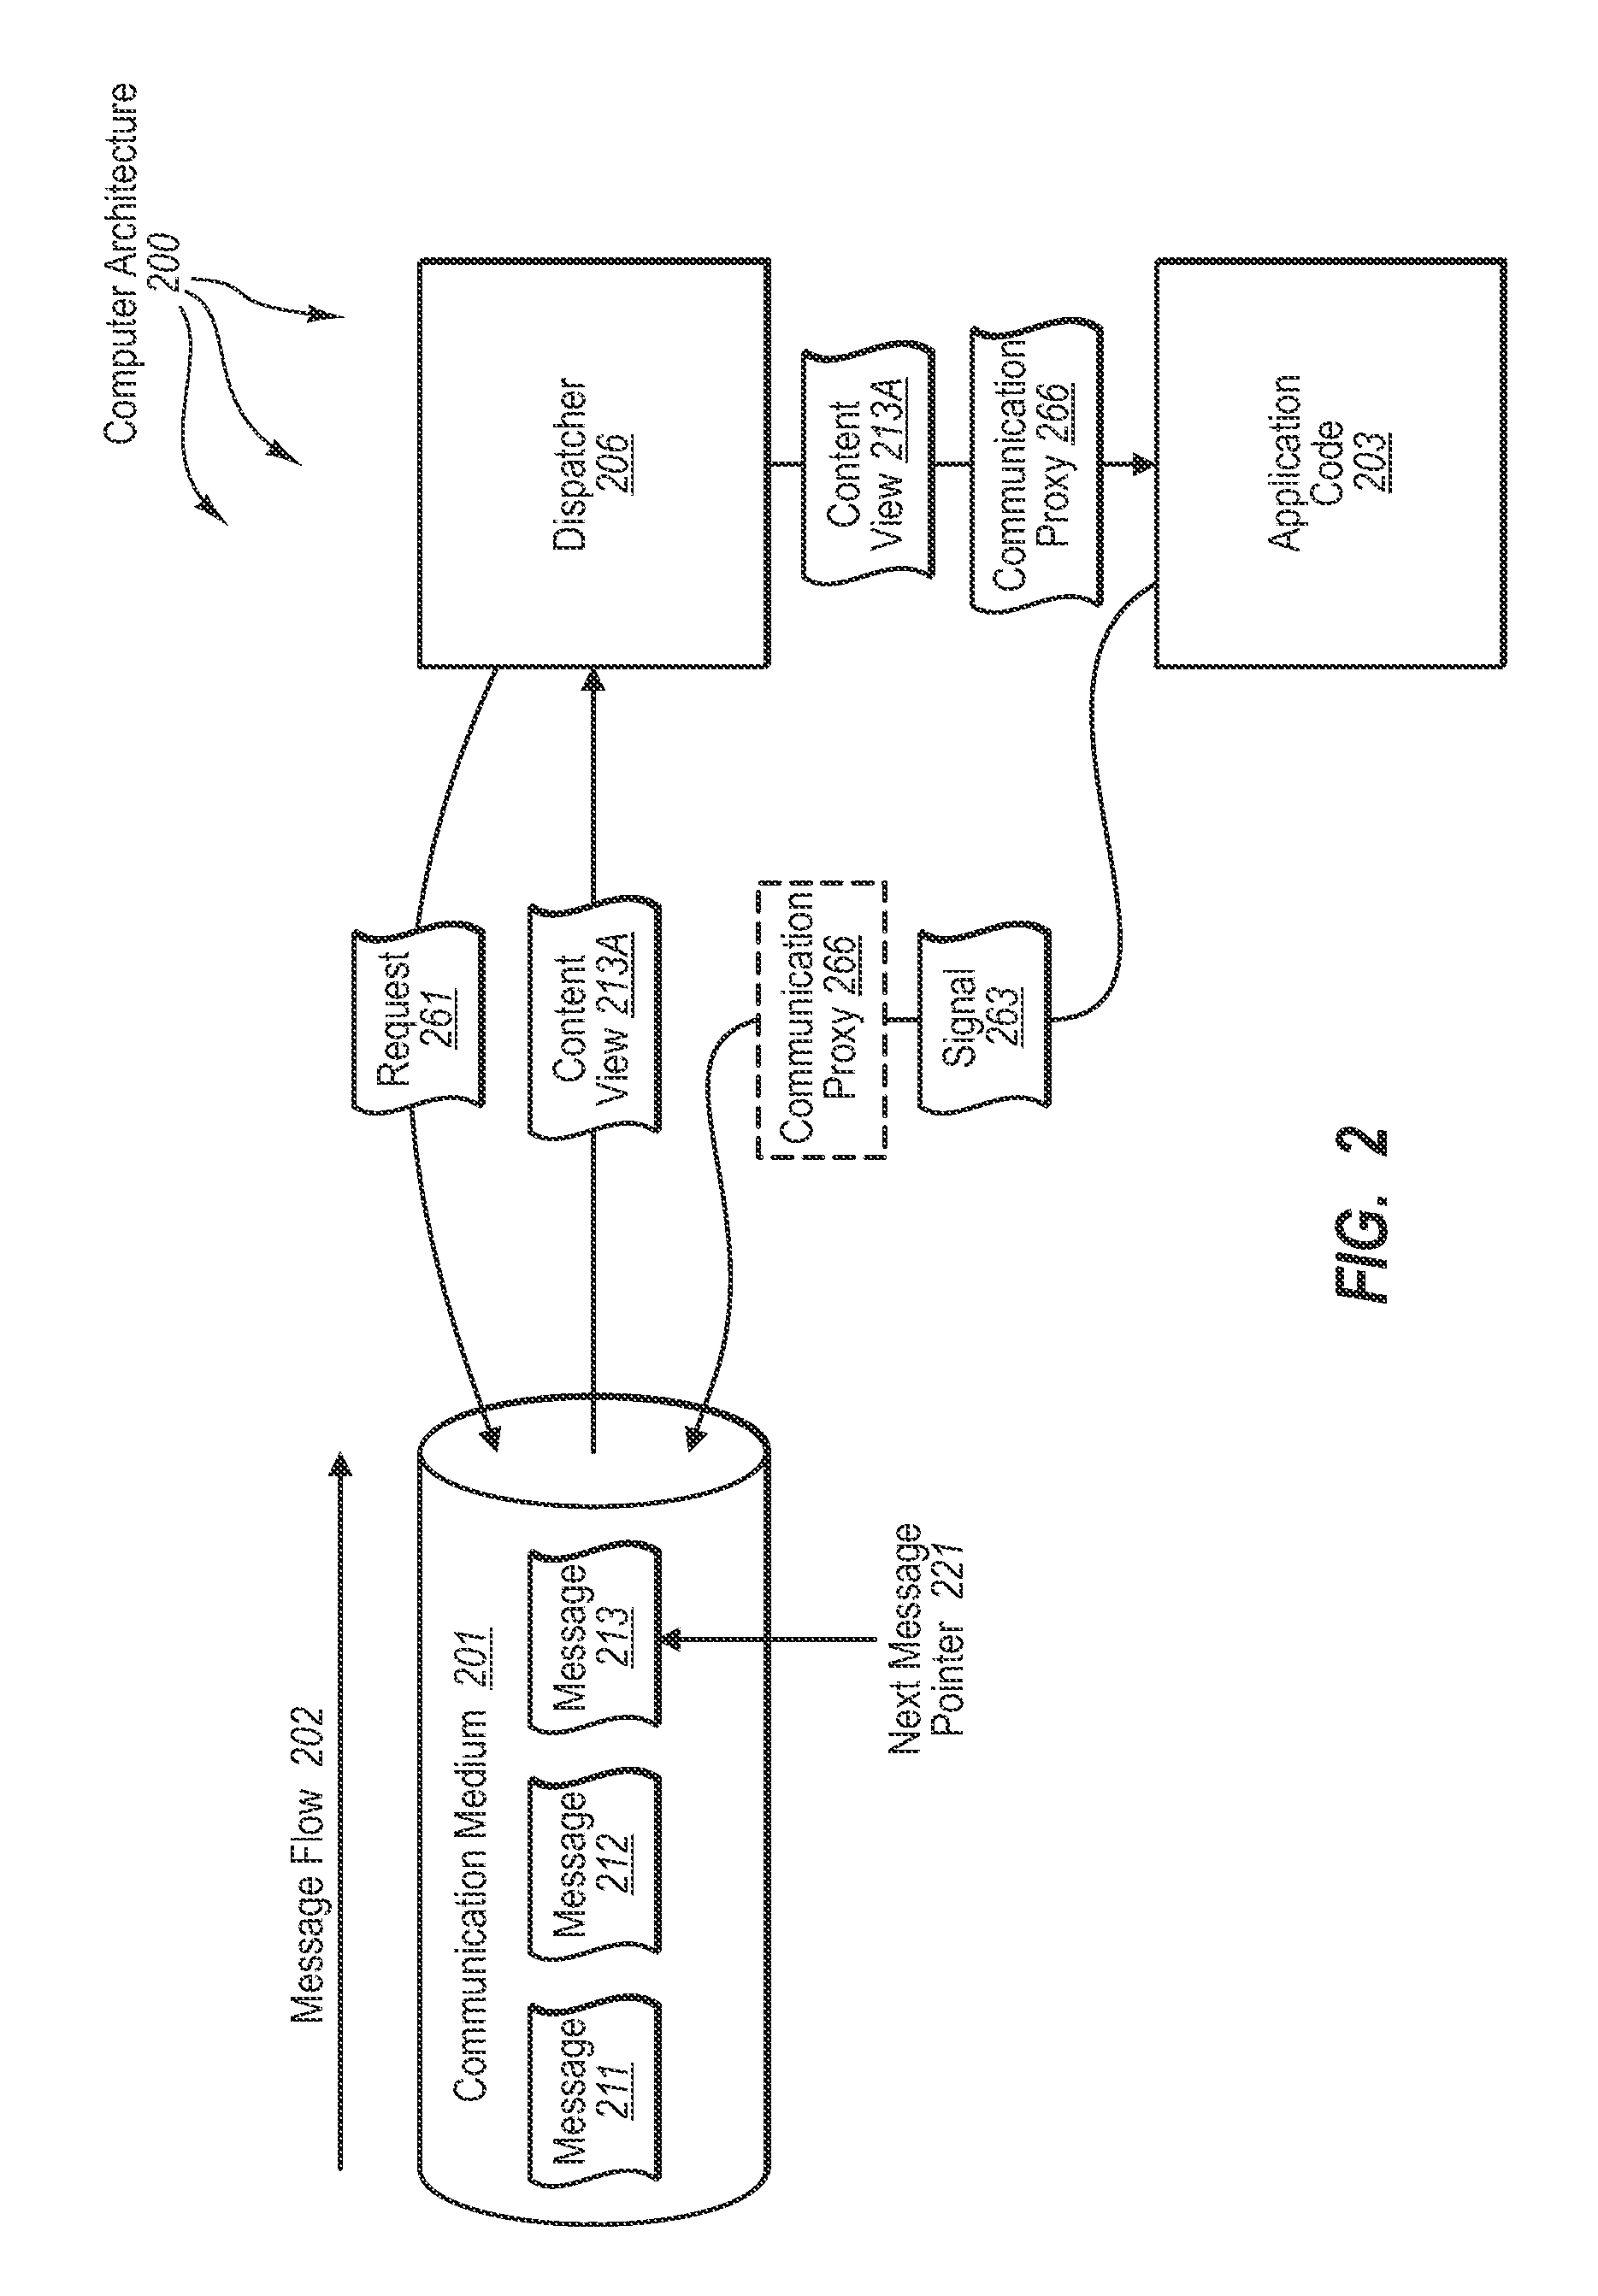 Dispatch mechanism for coordinating application and communication medium state